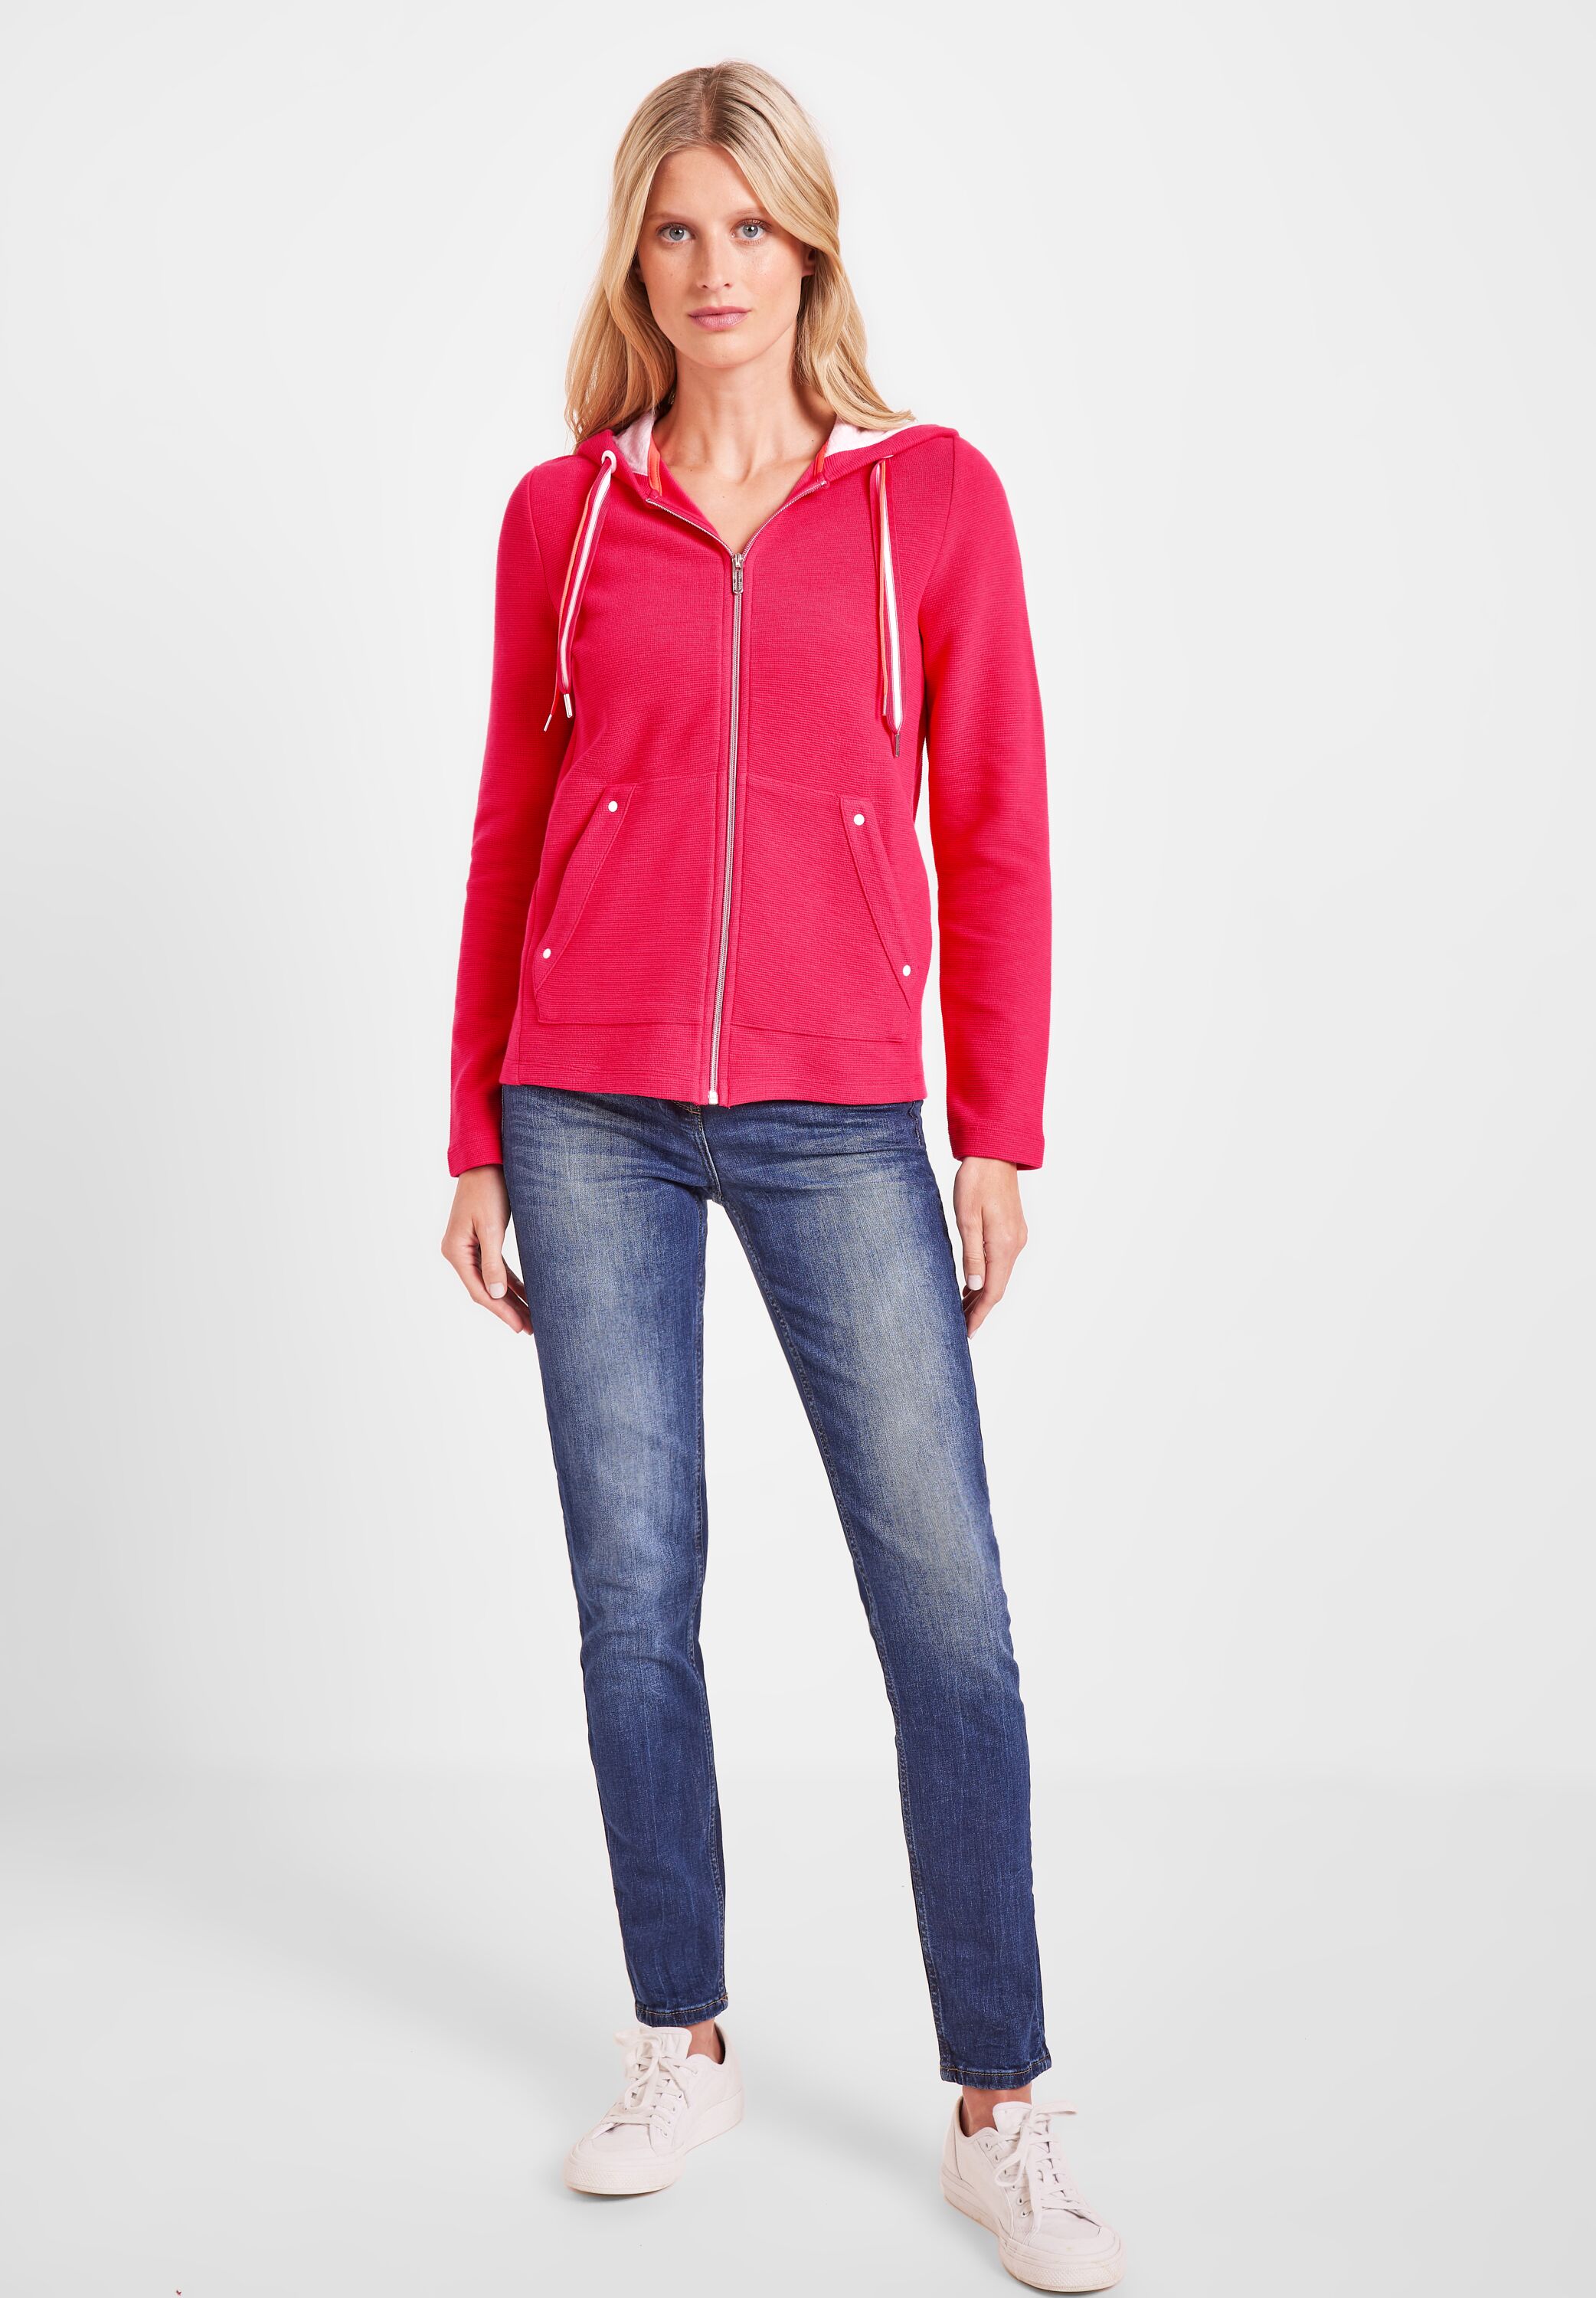 CECIL Shirtjacke Strawberry CONCEPT SALE reduziert in Red B319398-14472 - im Mode